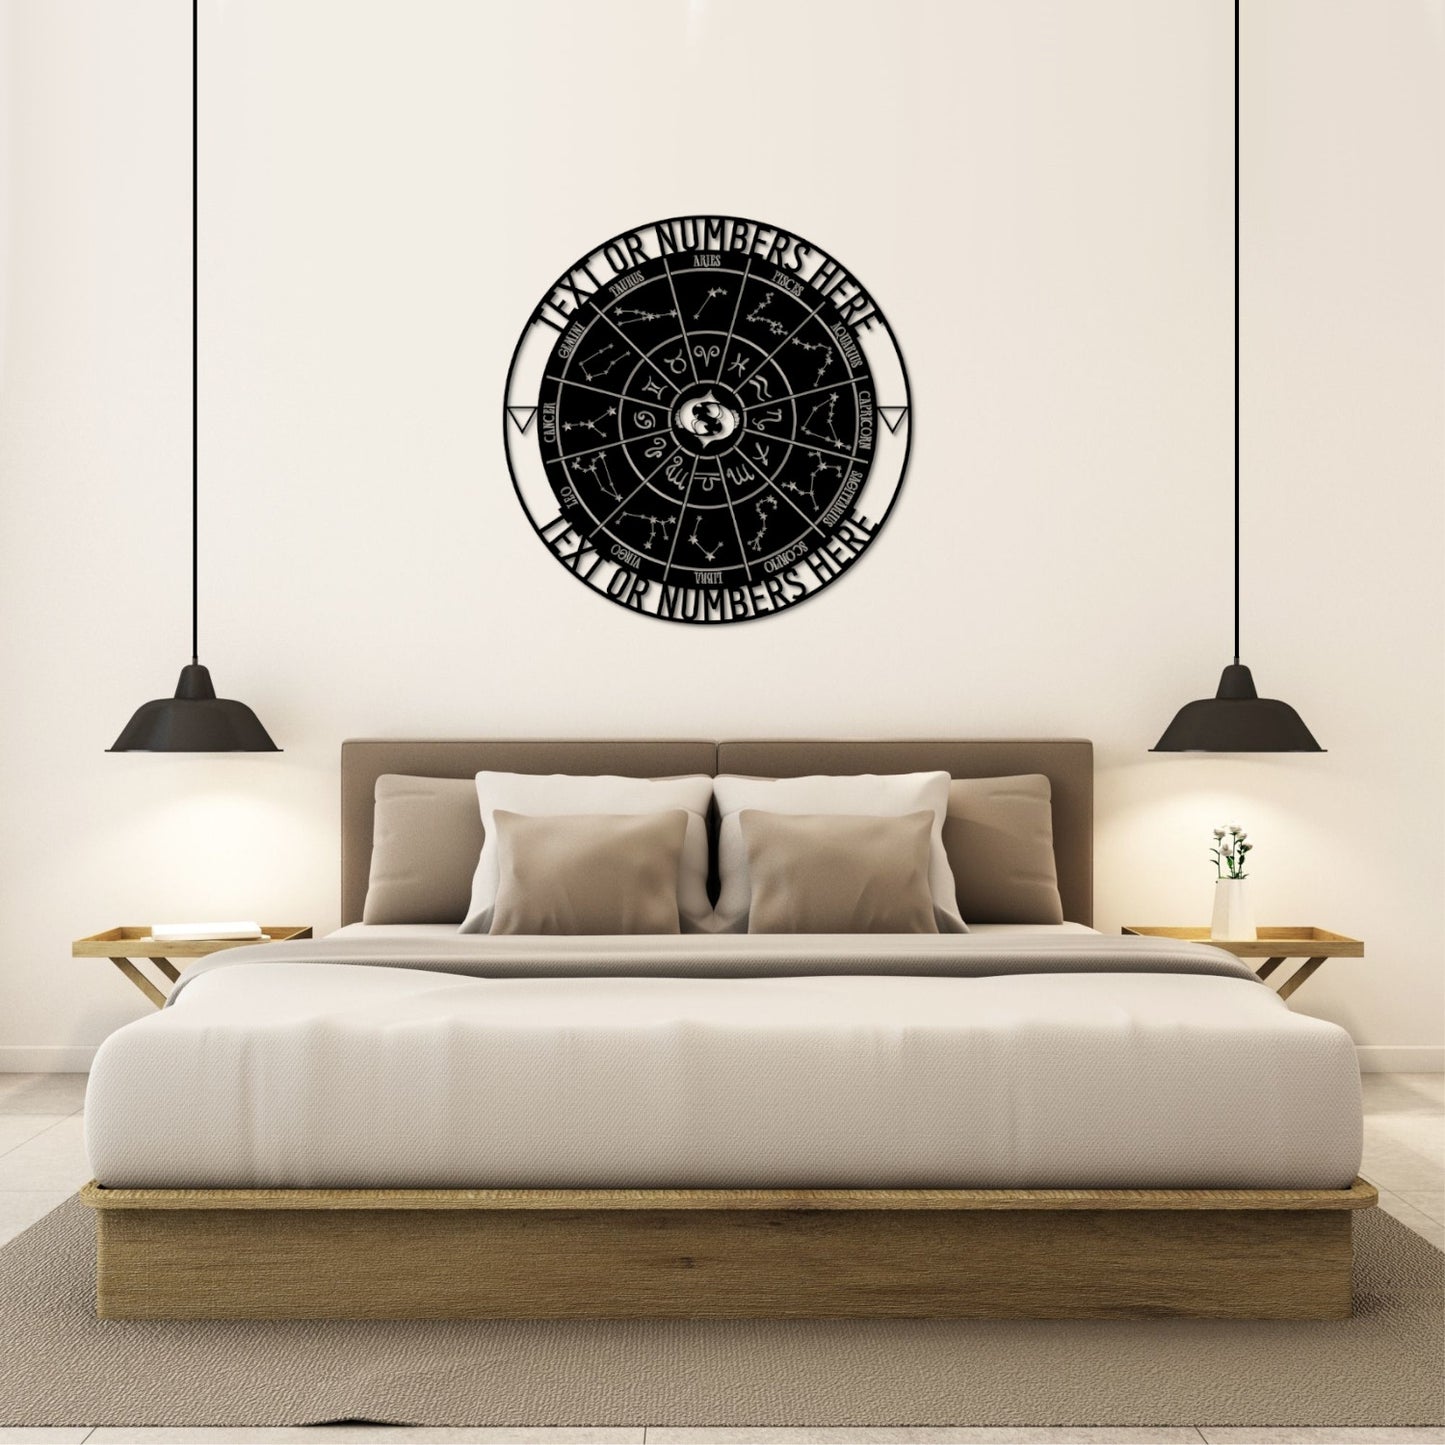 Personalized Pisces Zodiac Wheel Name Metal Sign | Custom Made Astrology Wall Decor | Celestial Gifts | Decorative Pisces Star Sign Hanging